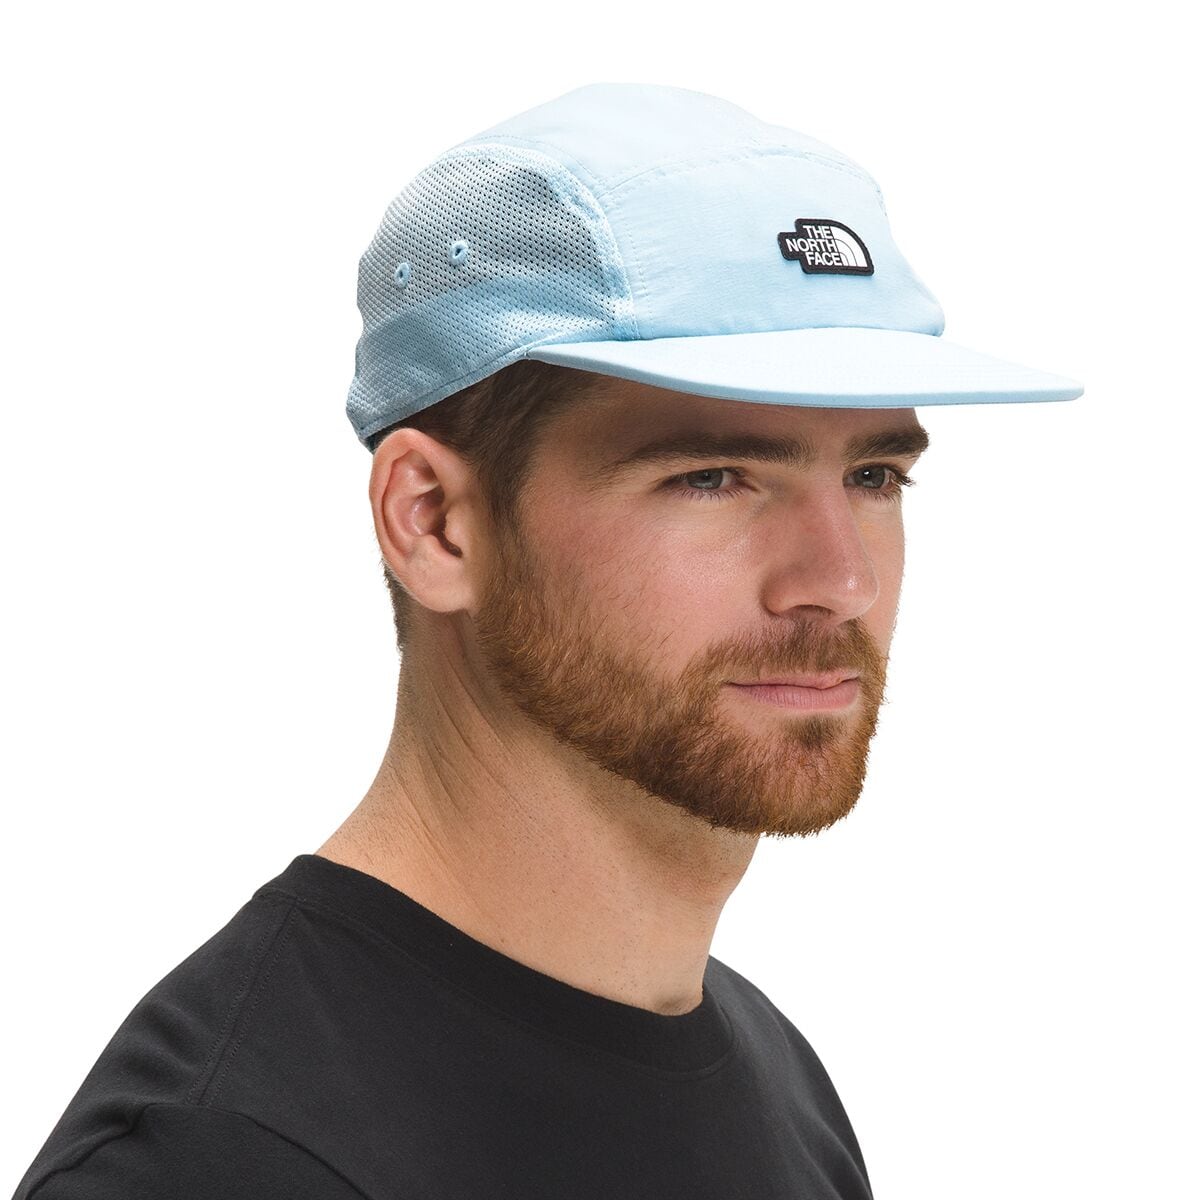 The North face 5 Panel cap. The North face class v Camp hat.